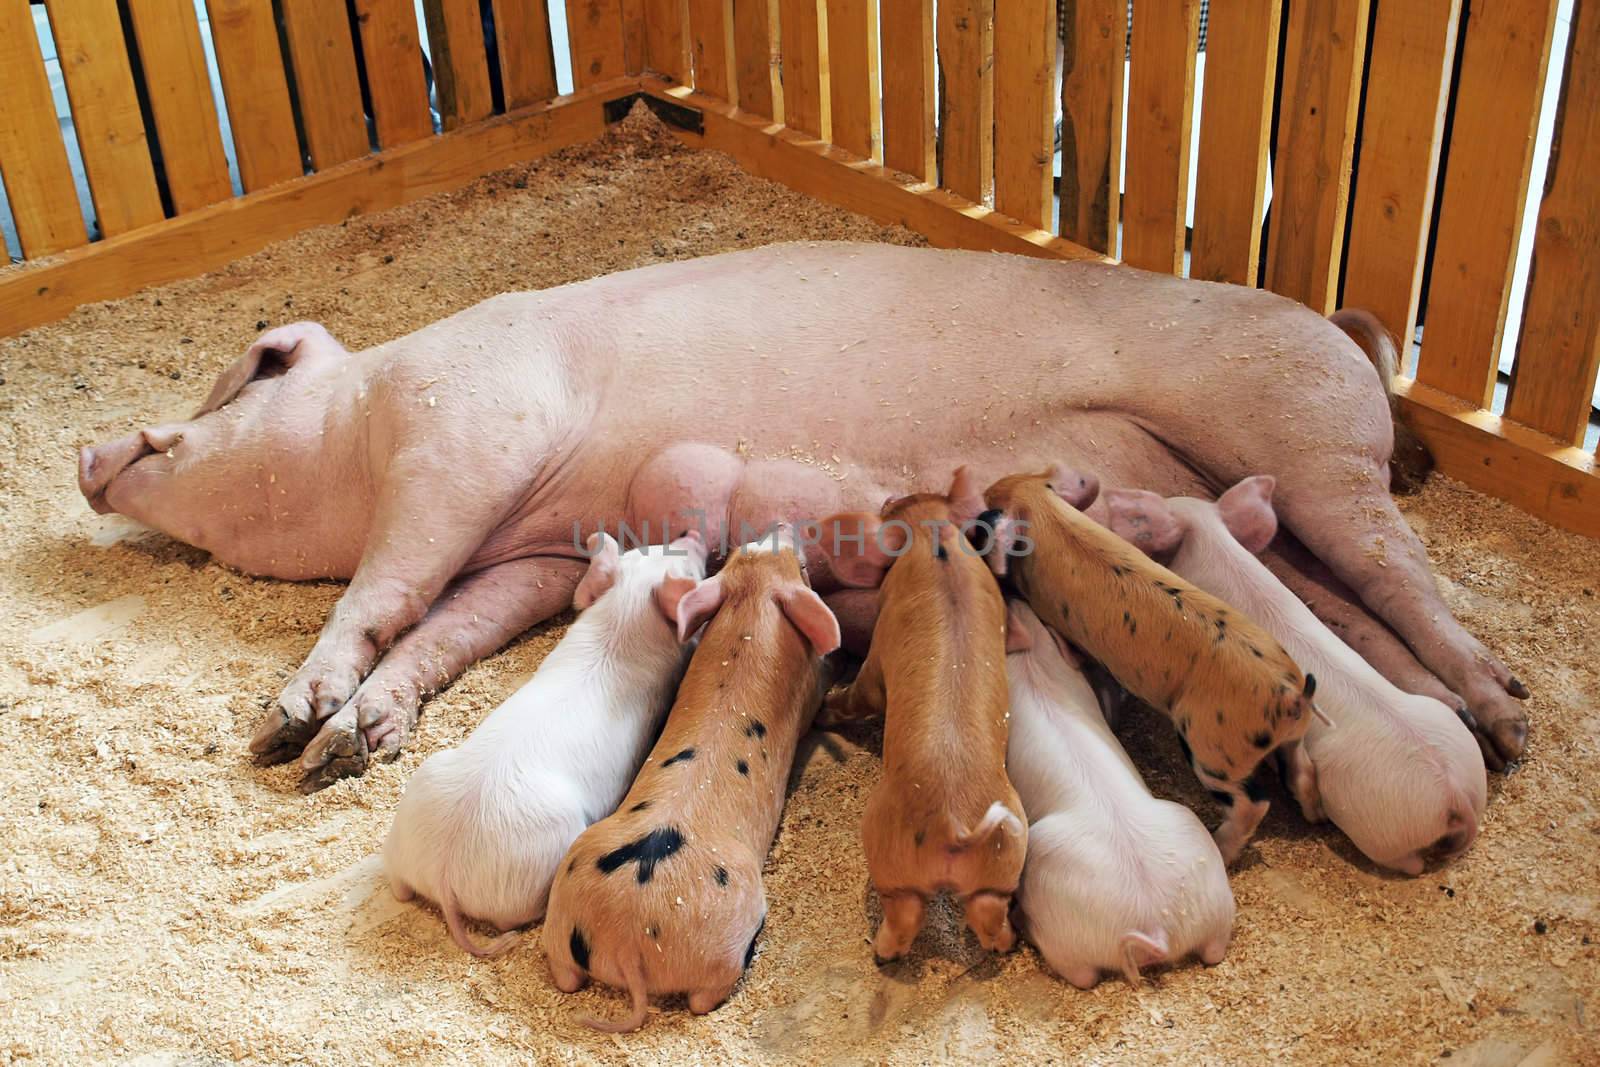 Momma pig feeding hungry little piglets